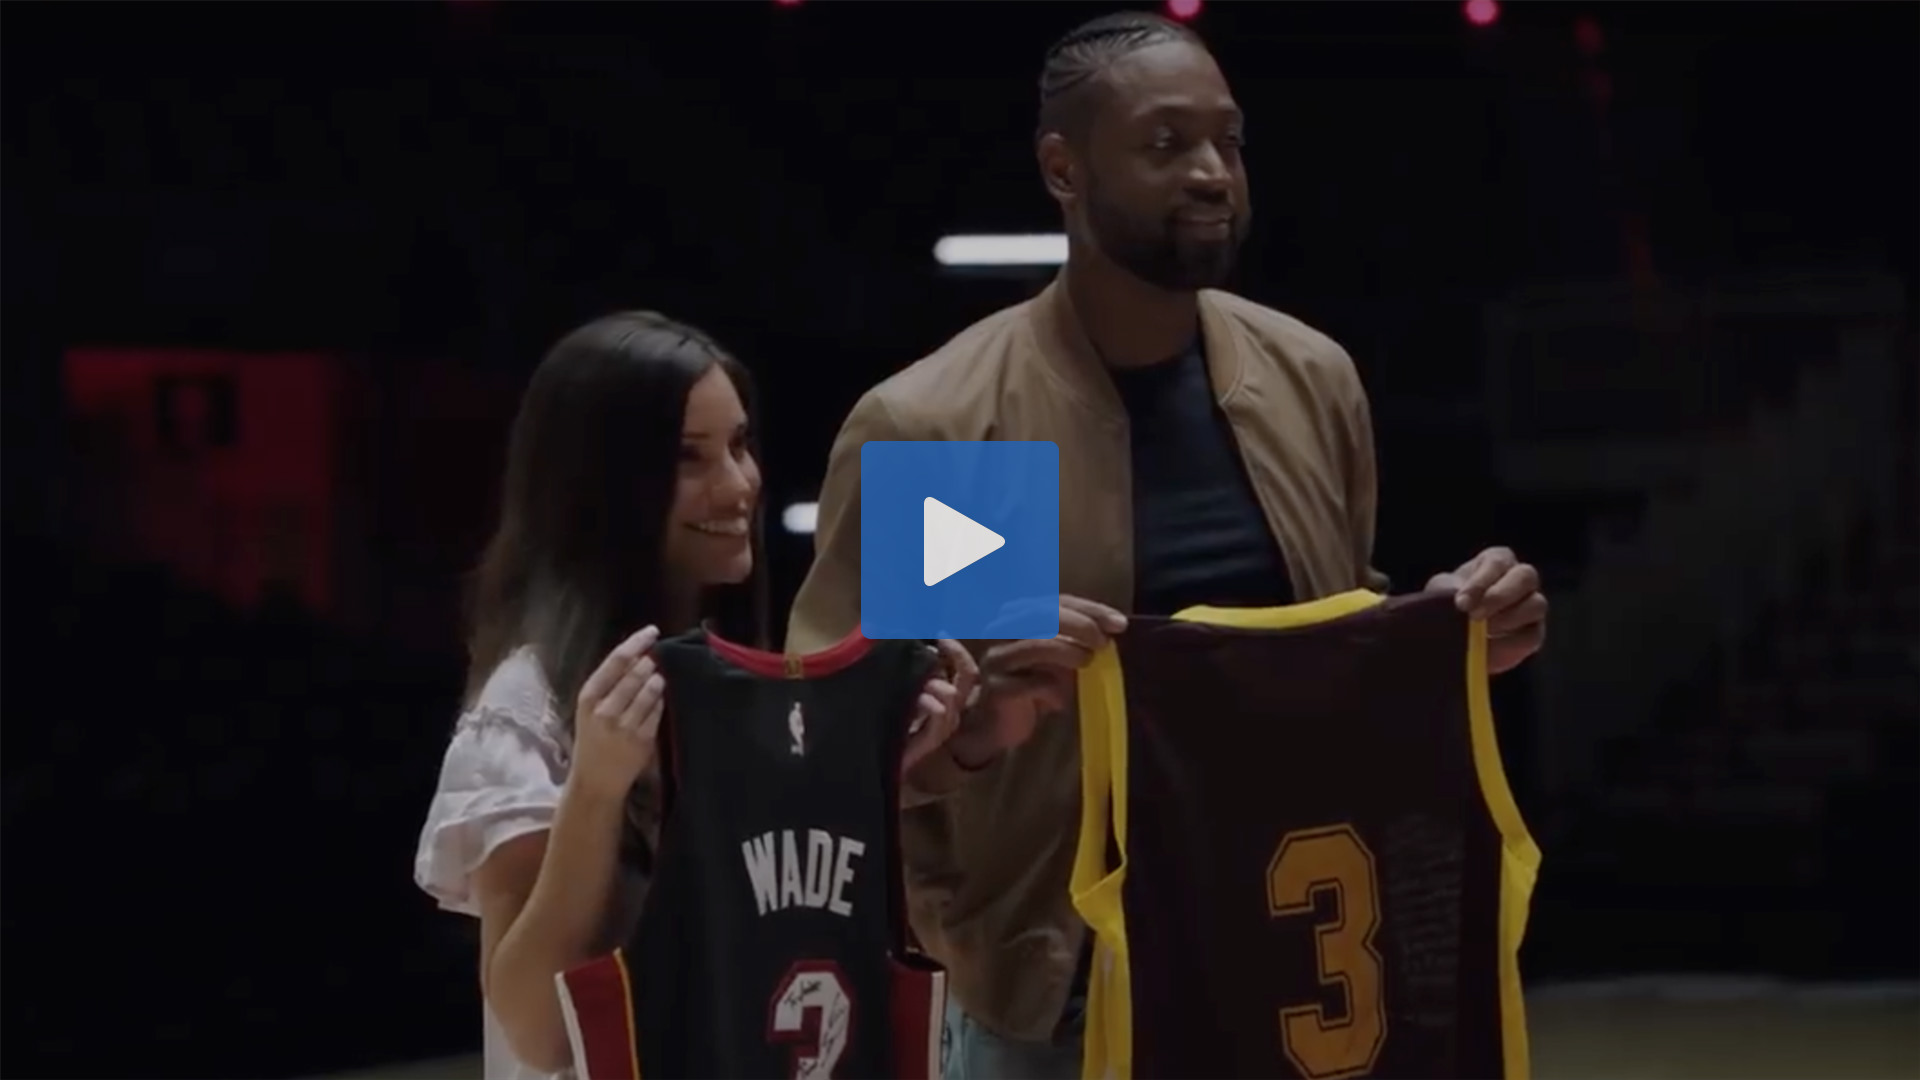 WATCH: Budweiser honours Dwyane Wade's legacy with emotional commercial | Sporting News1920 x 1080